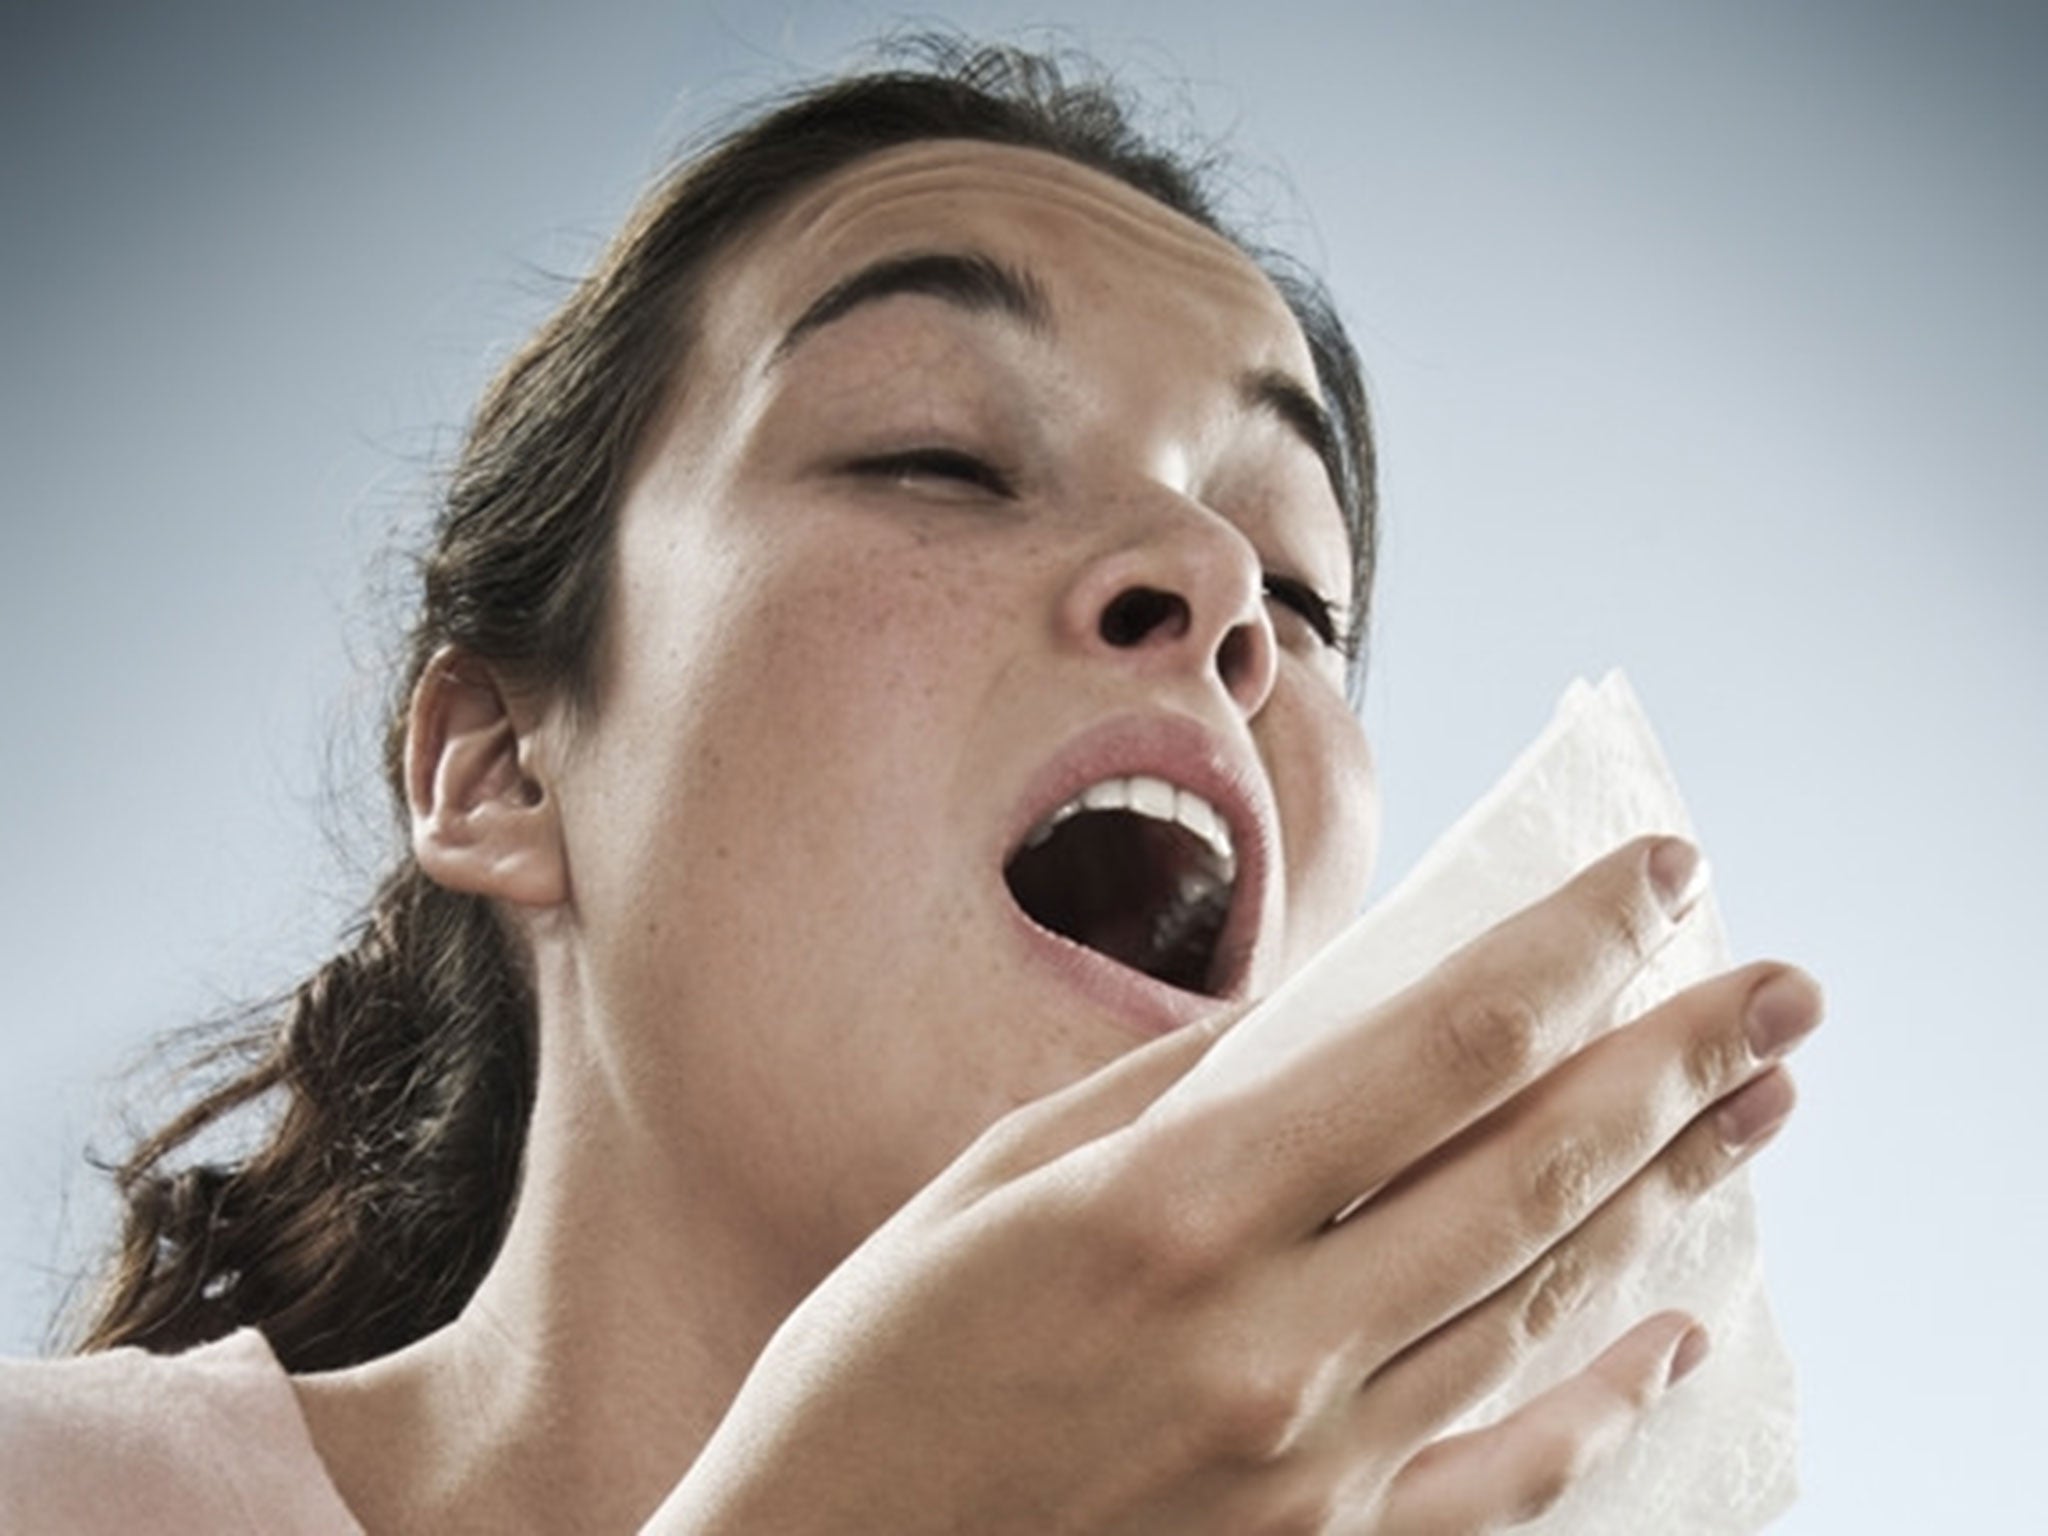 The flu can cause dangerous complications for some people